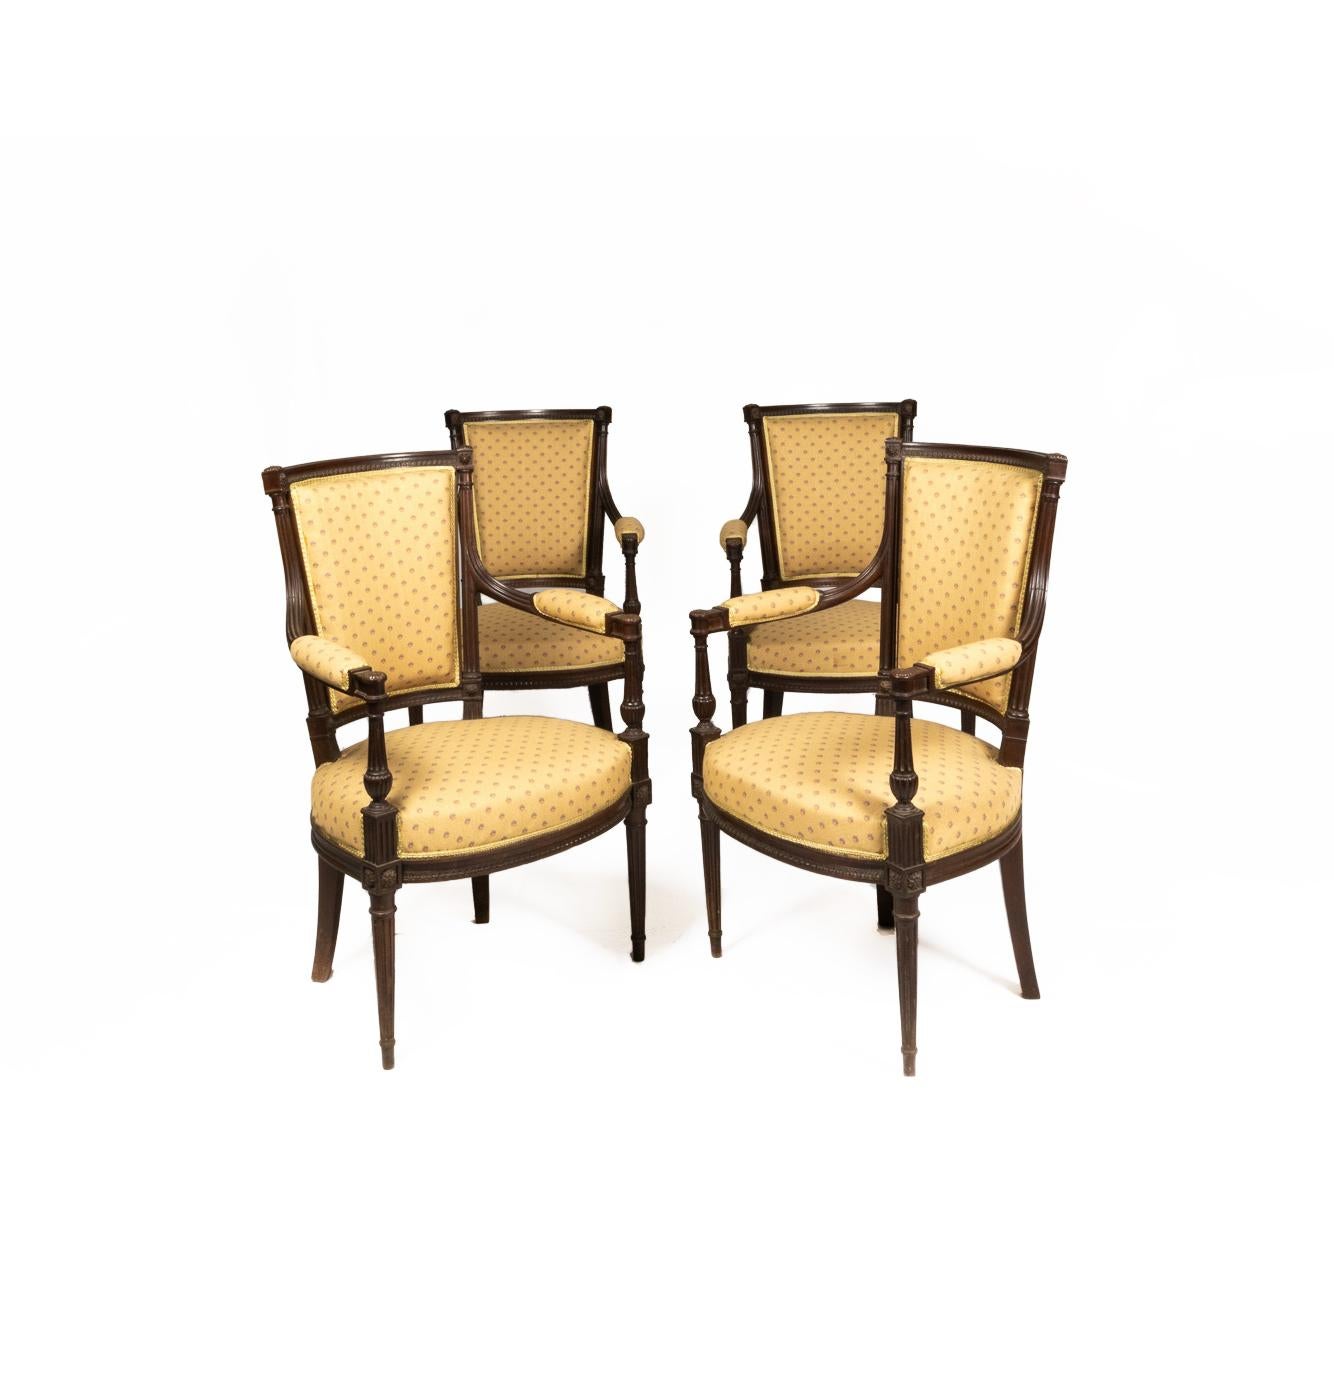 Louis XVI style salon suite: A five pieces with four armchairs and one canapé in cuban mahogany in “twisted rope” carving style.
Yellow upholstery with floral monogram. 
The structure was recently checked by a professional carpenter and has no